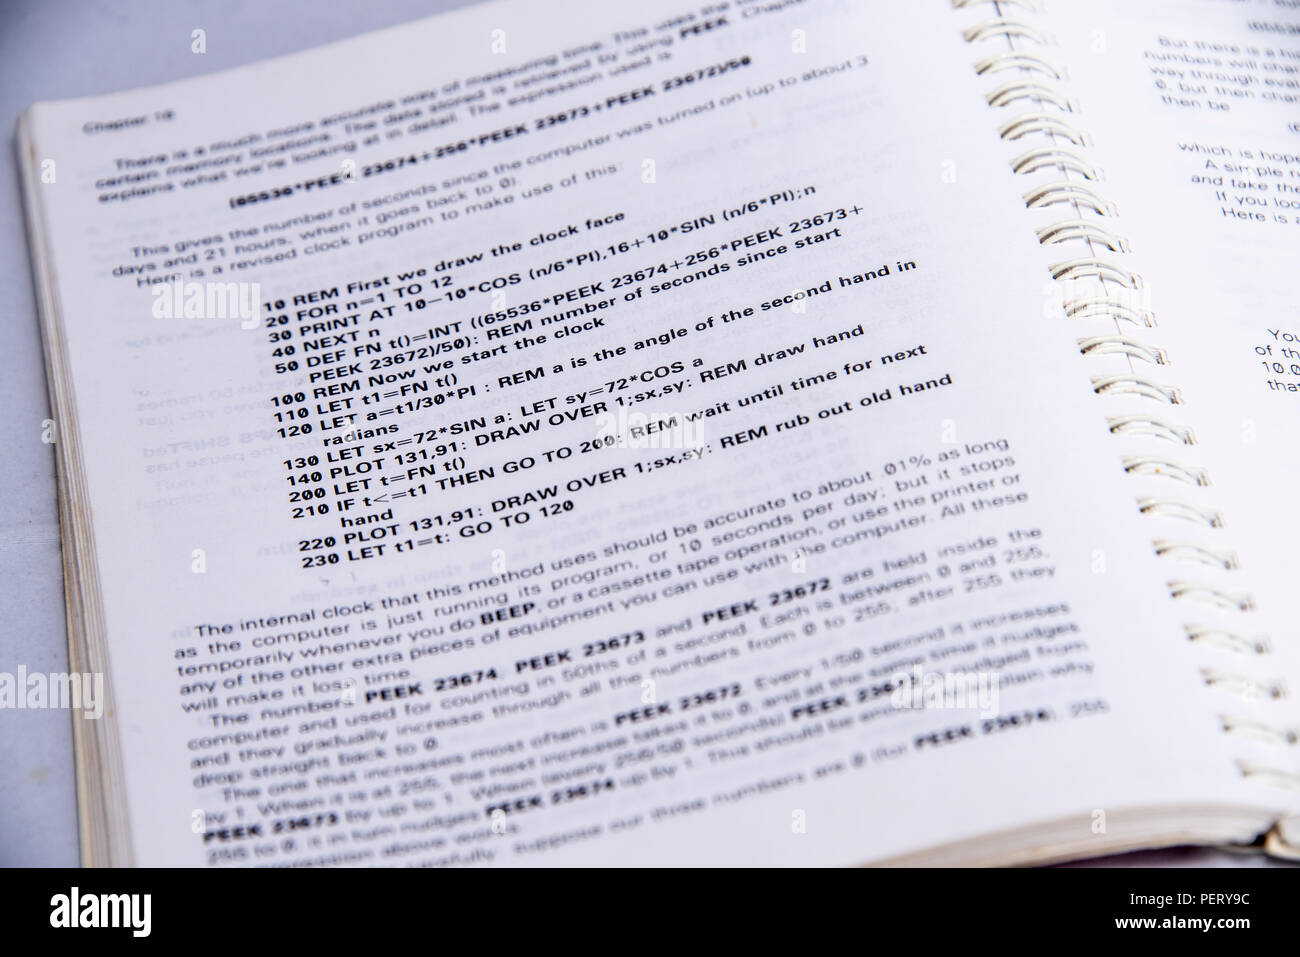 Page of programming code in the Sinclair Spectrum Programming Manual Stock Photo